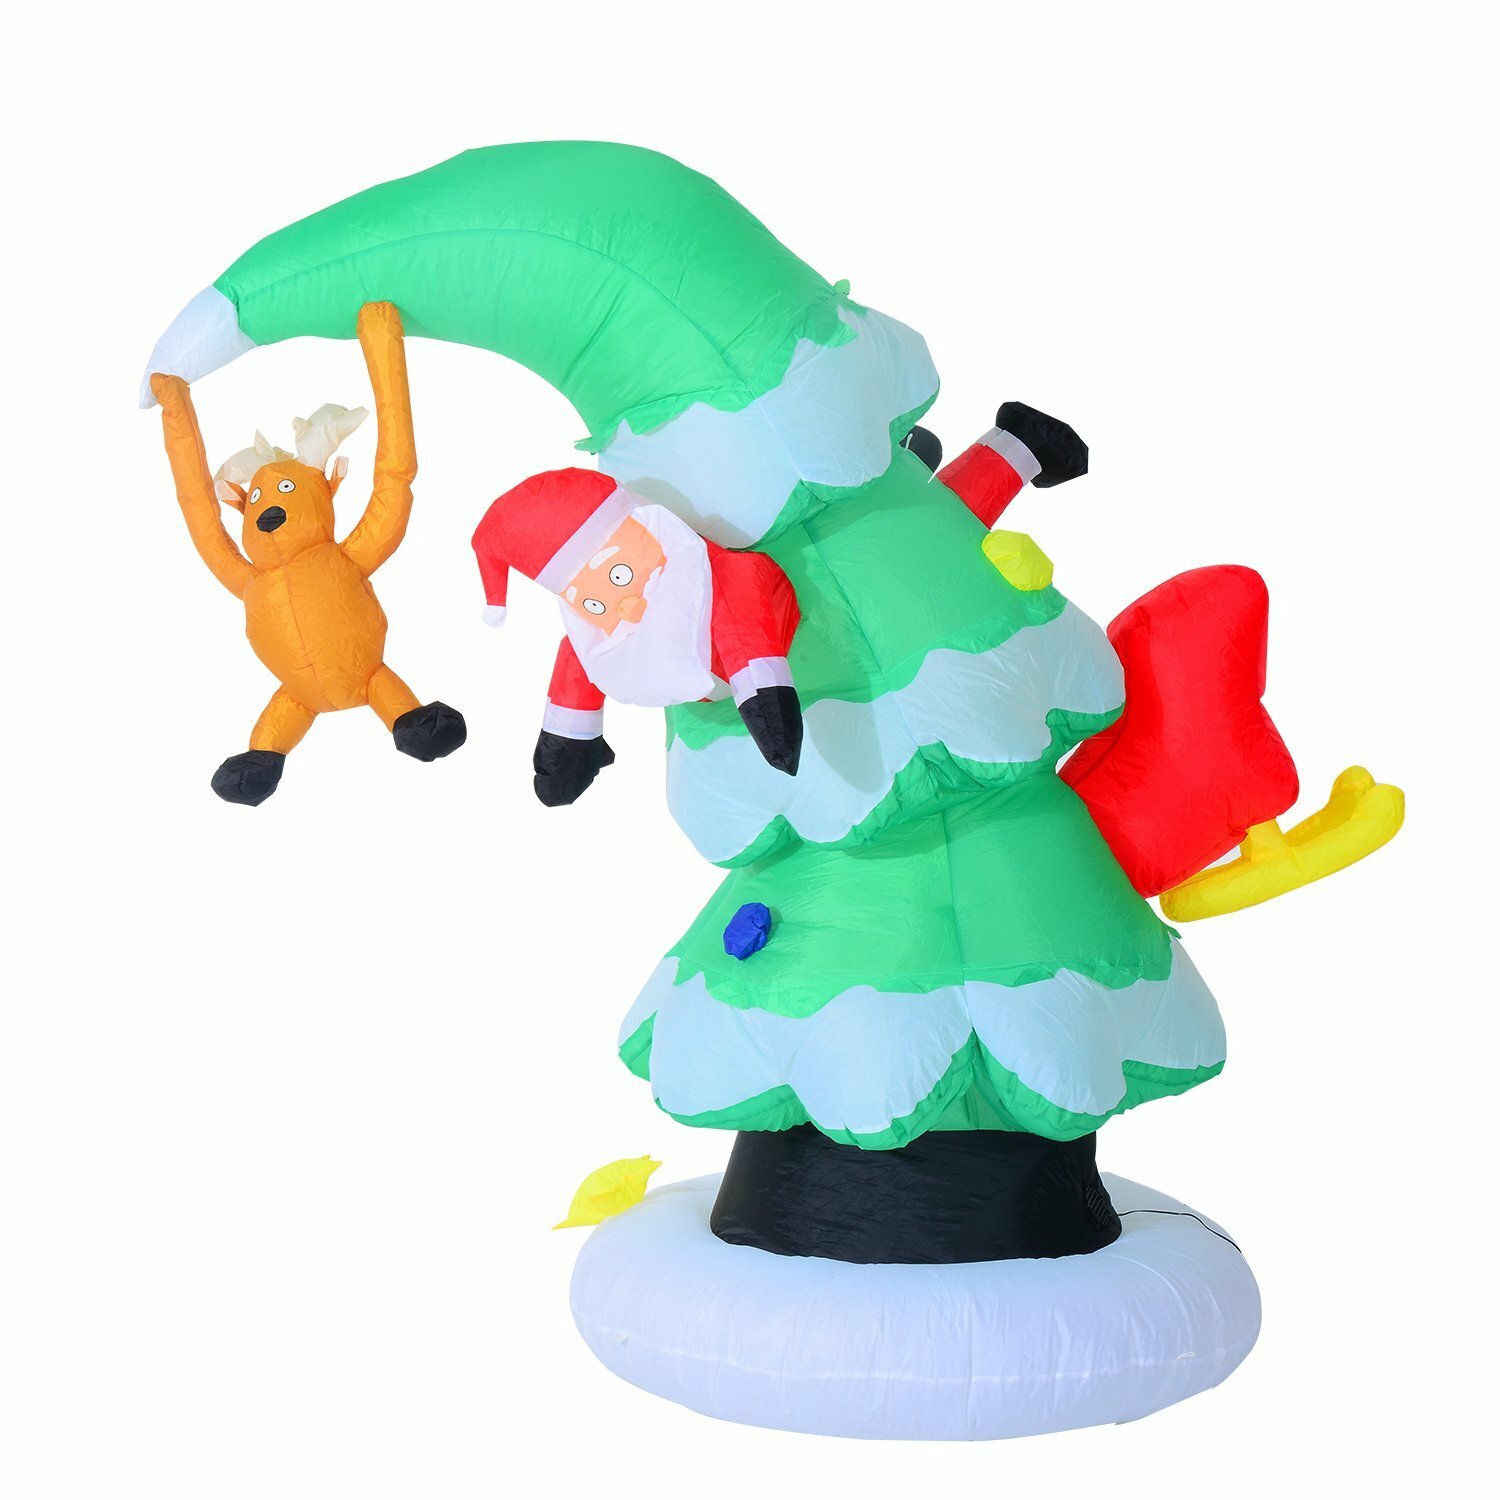 Aosom 7' Inflatable LED Lit Santa Claus Stuck in Christmas Tree Lawn ...